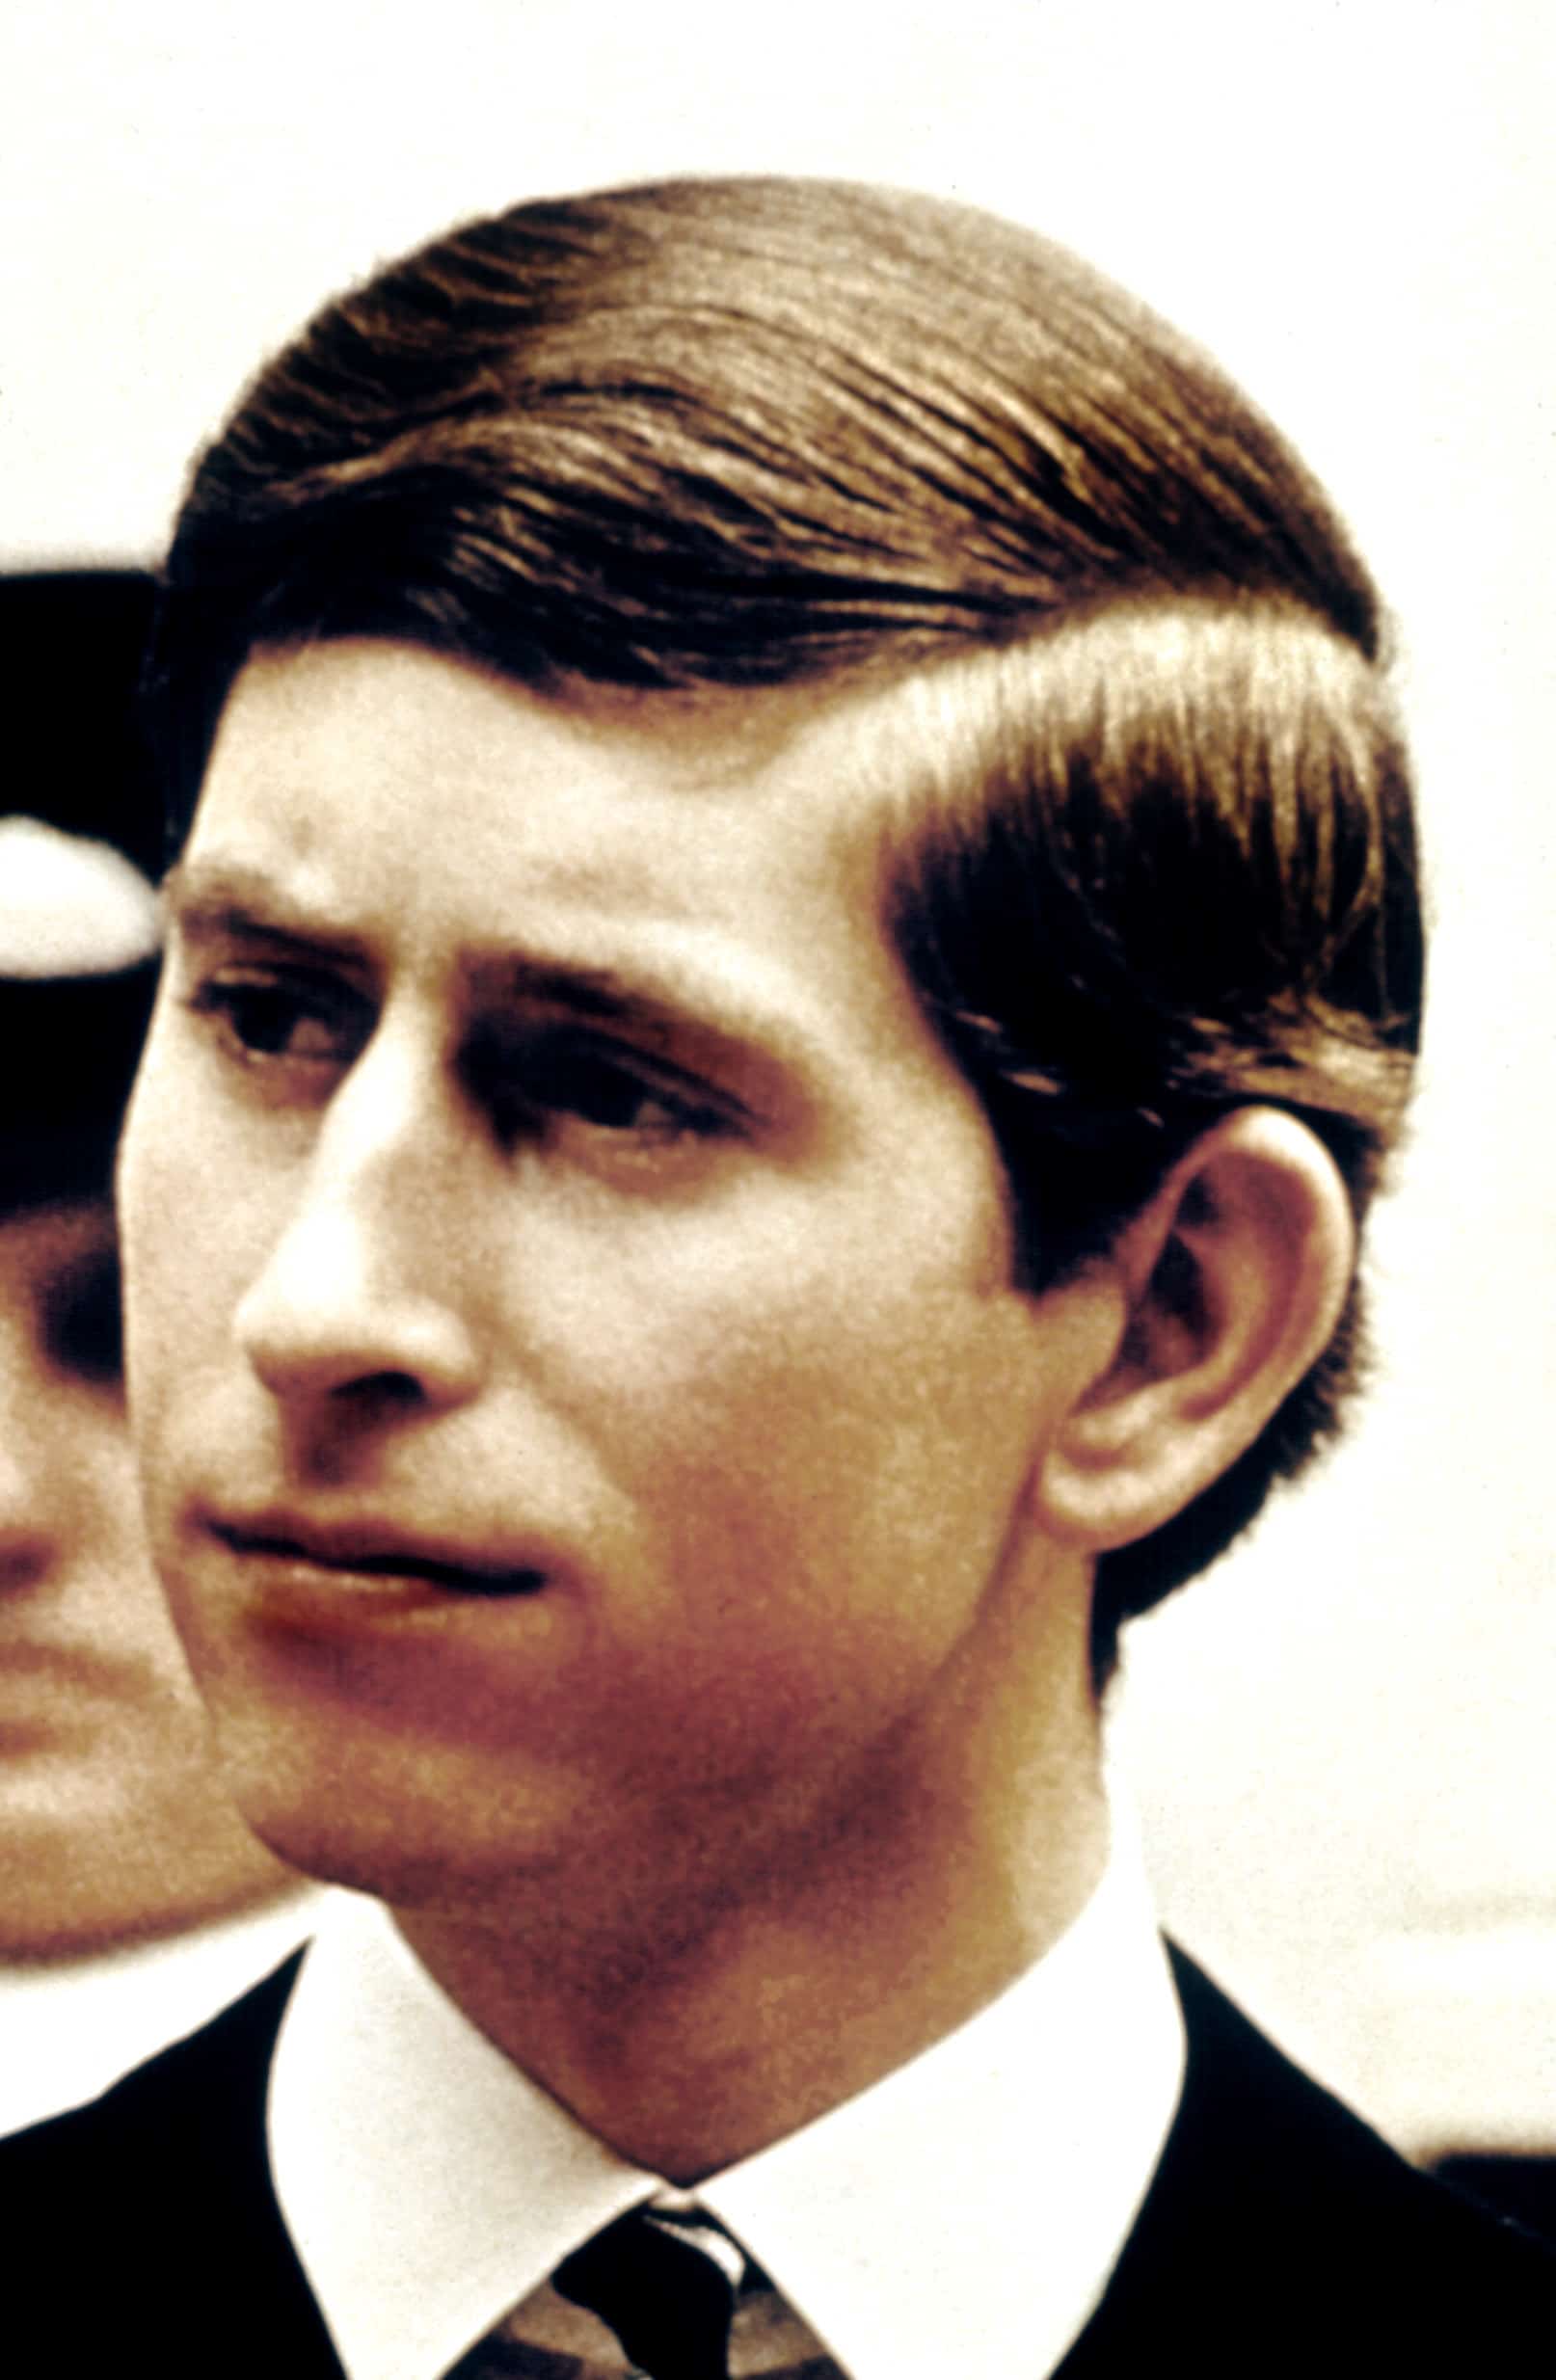 PRINCE CHARLES, (no date)